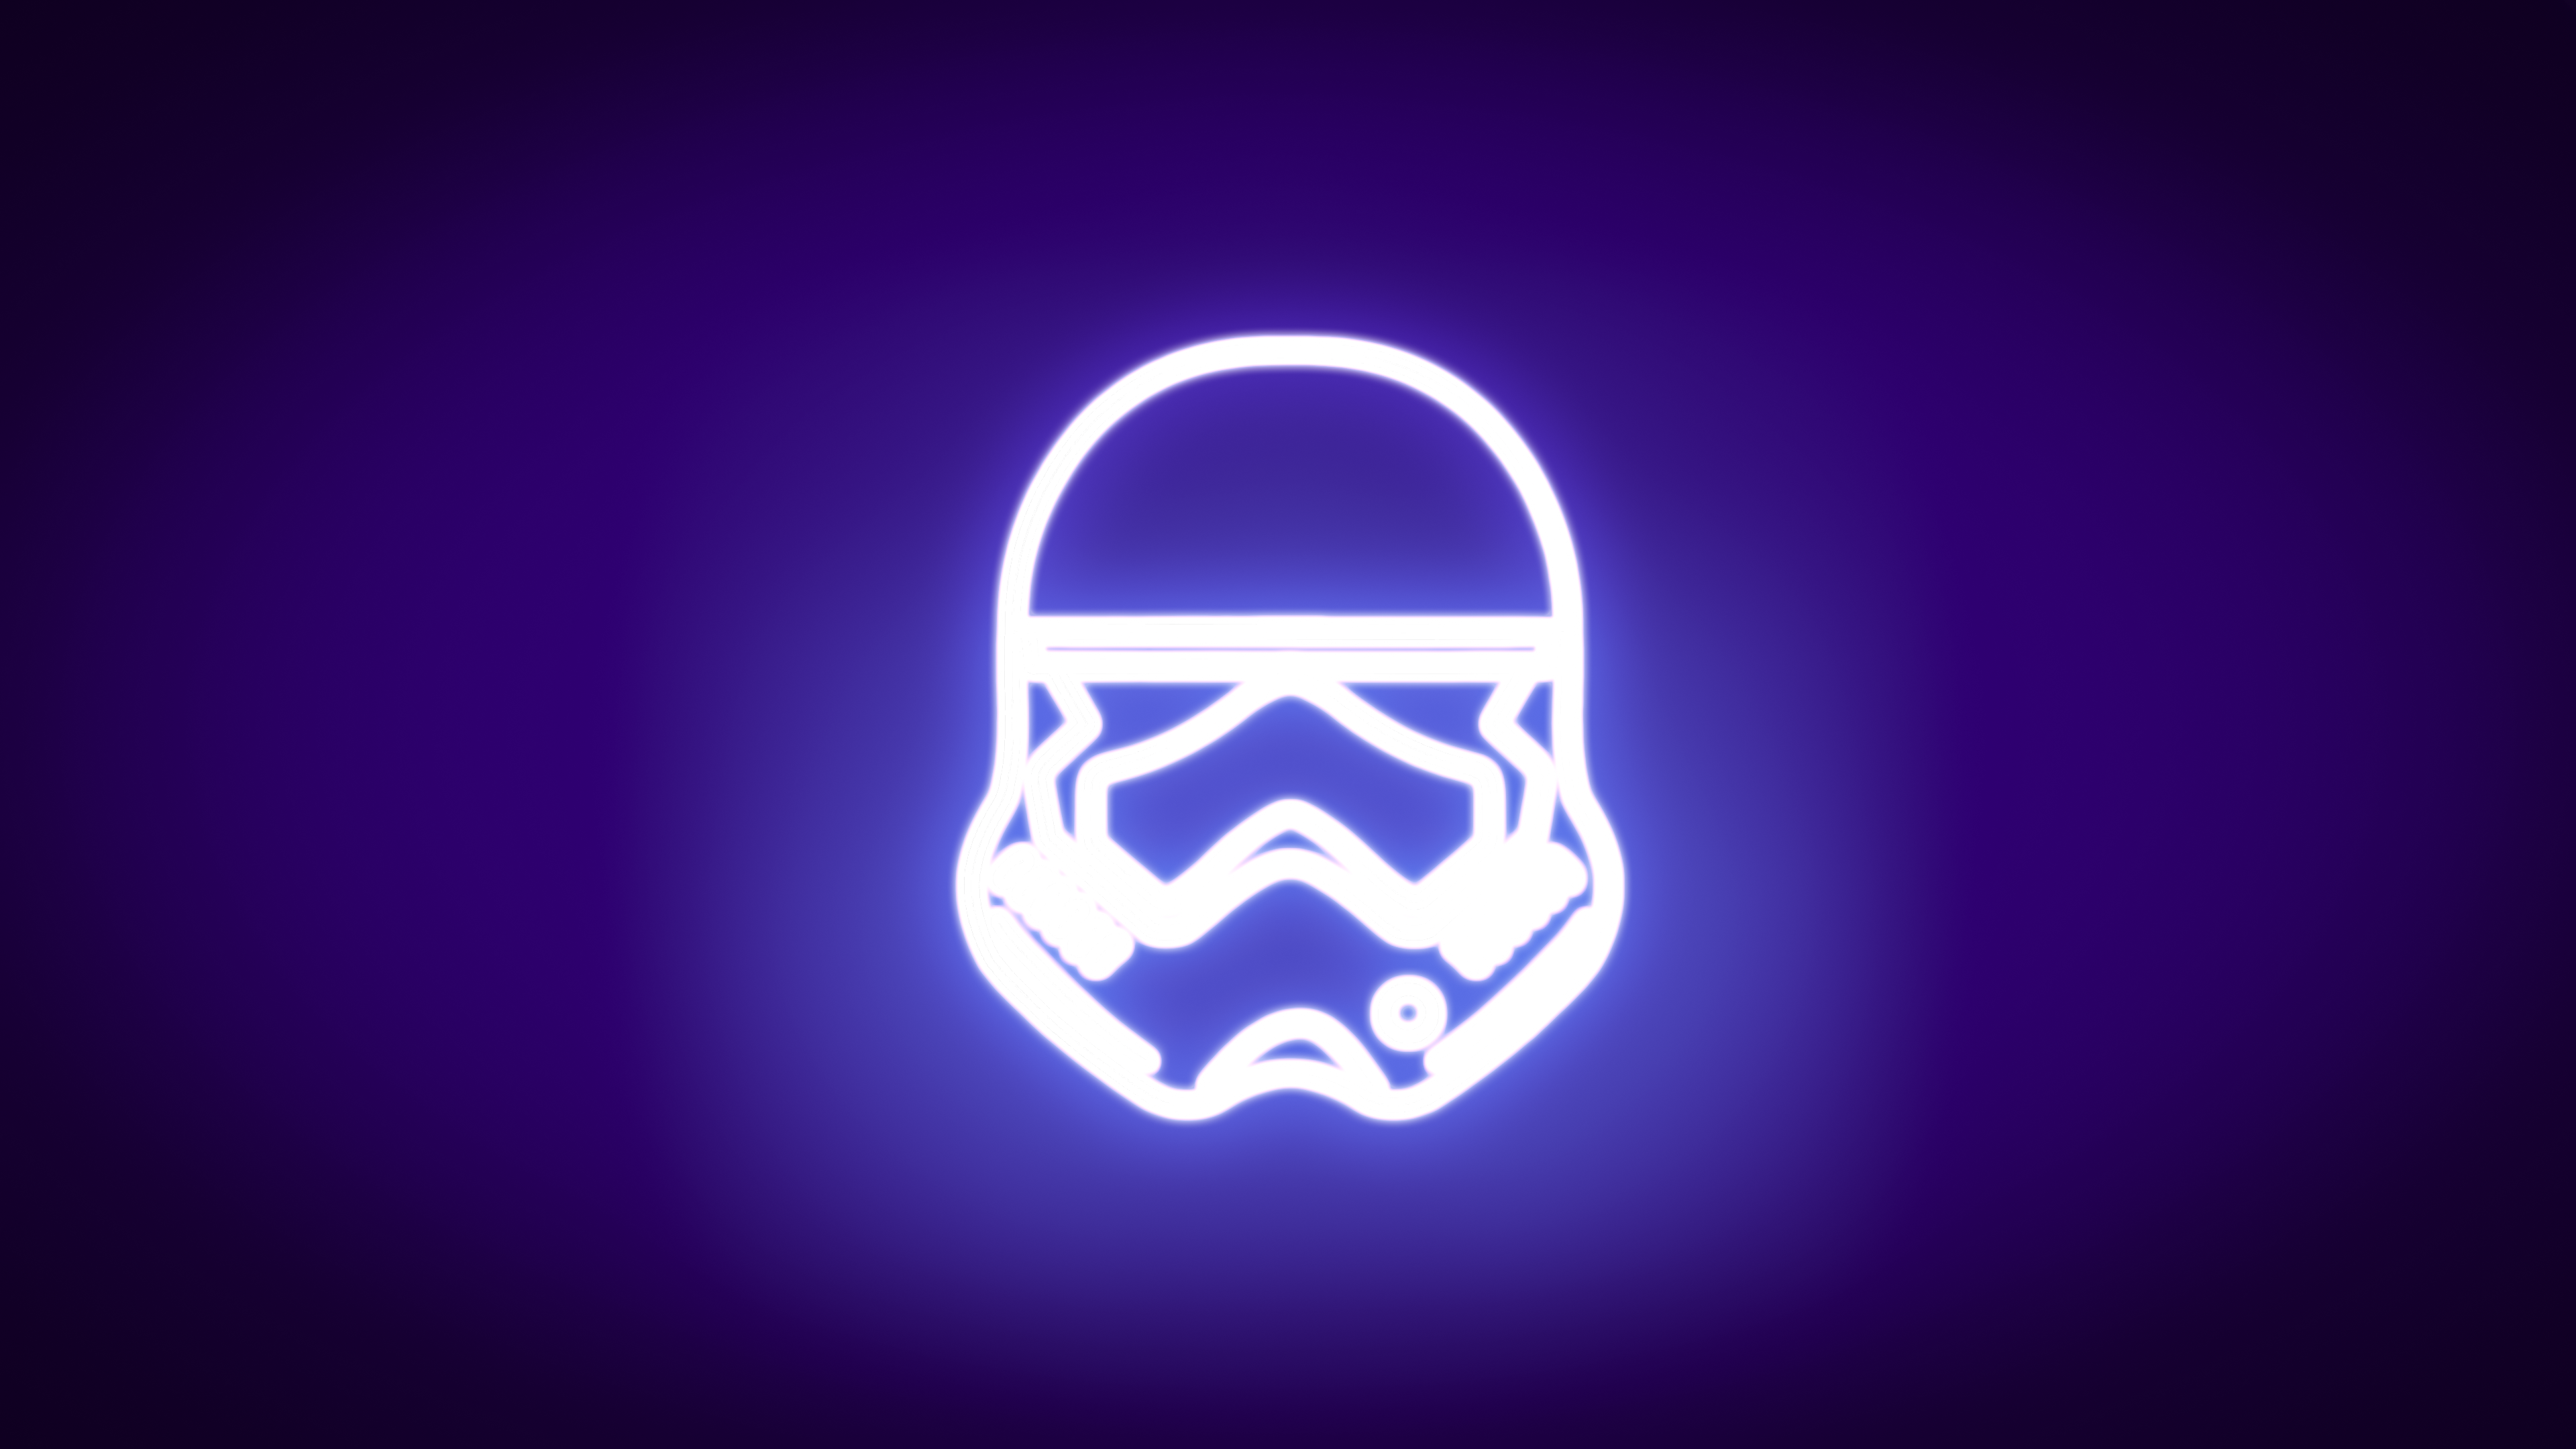 Star Wars Neon Simple Background Minimalism Stormtrooper Imperial Forces Imperial Stormtrooper Helme 3840x2160